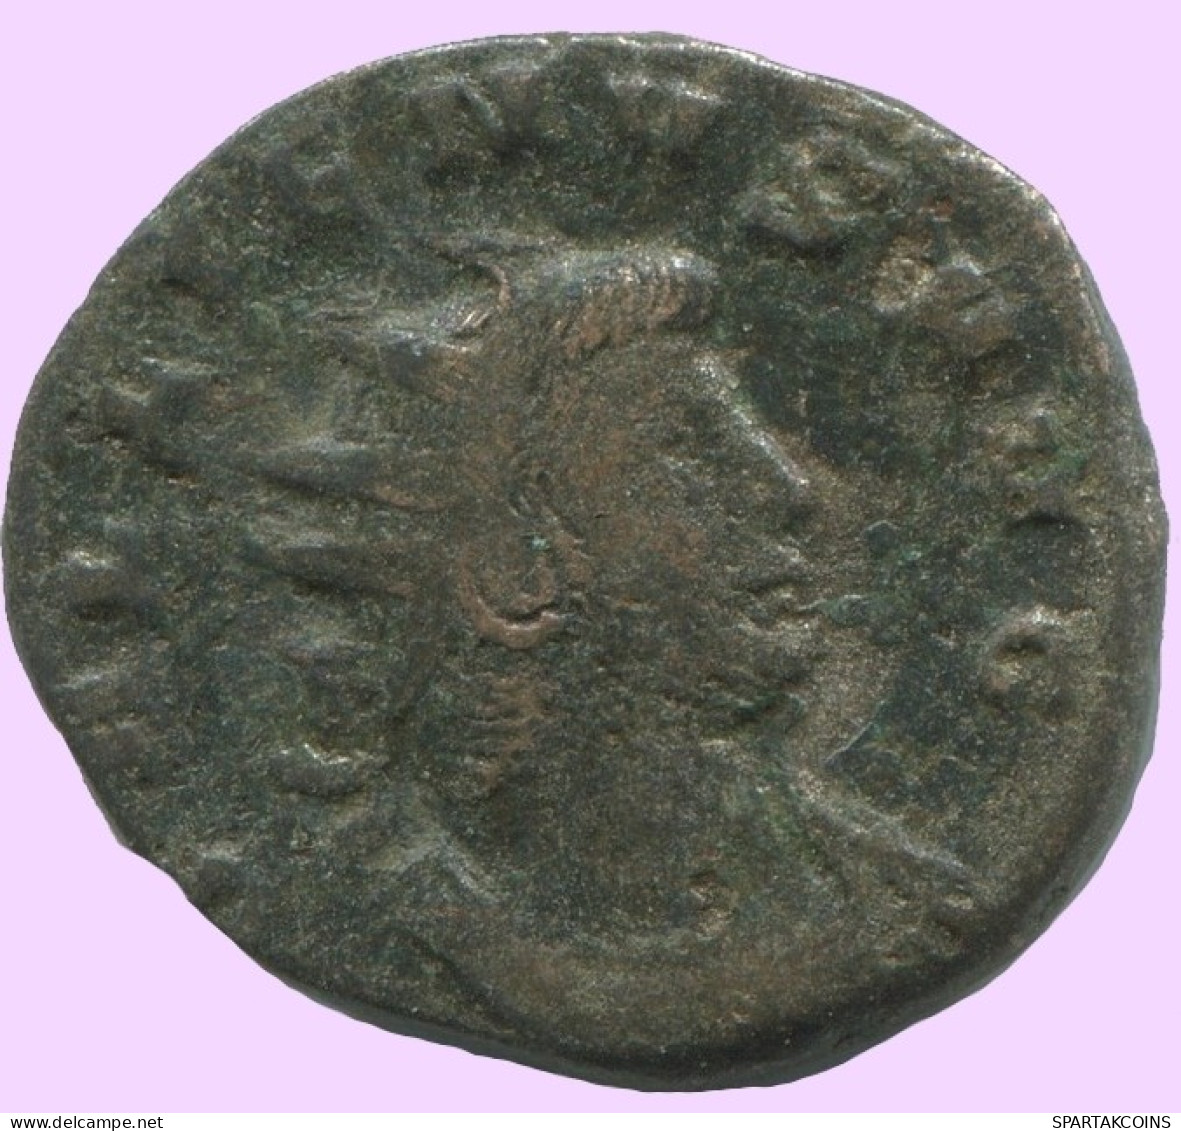 LATE ROMAN EMPIRE Follis Antique Authentique Roman Pièce 3.1g/20mm #ANT2078.7.F.A - The End Of Empire (363 AD To 476 AD)